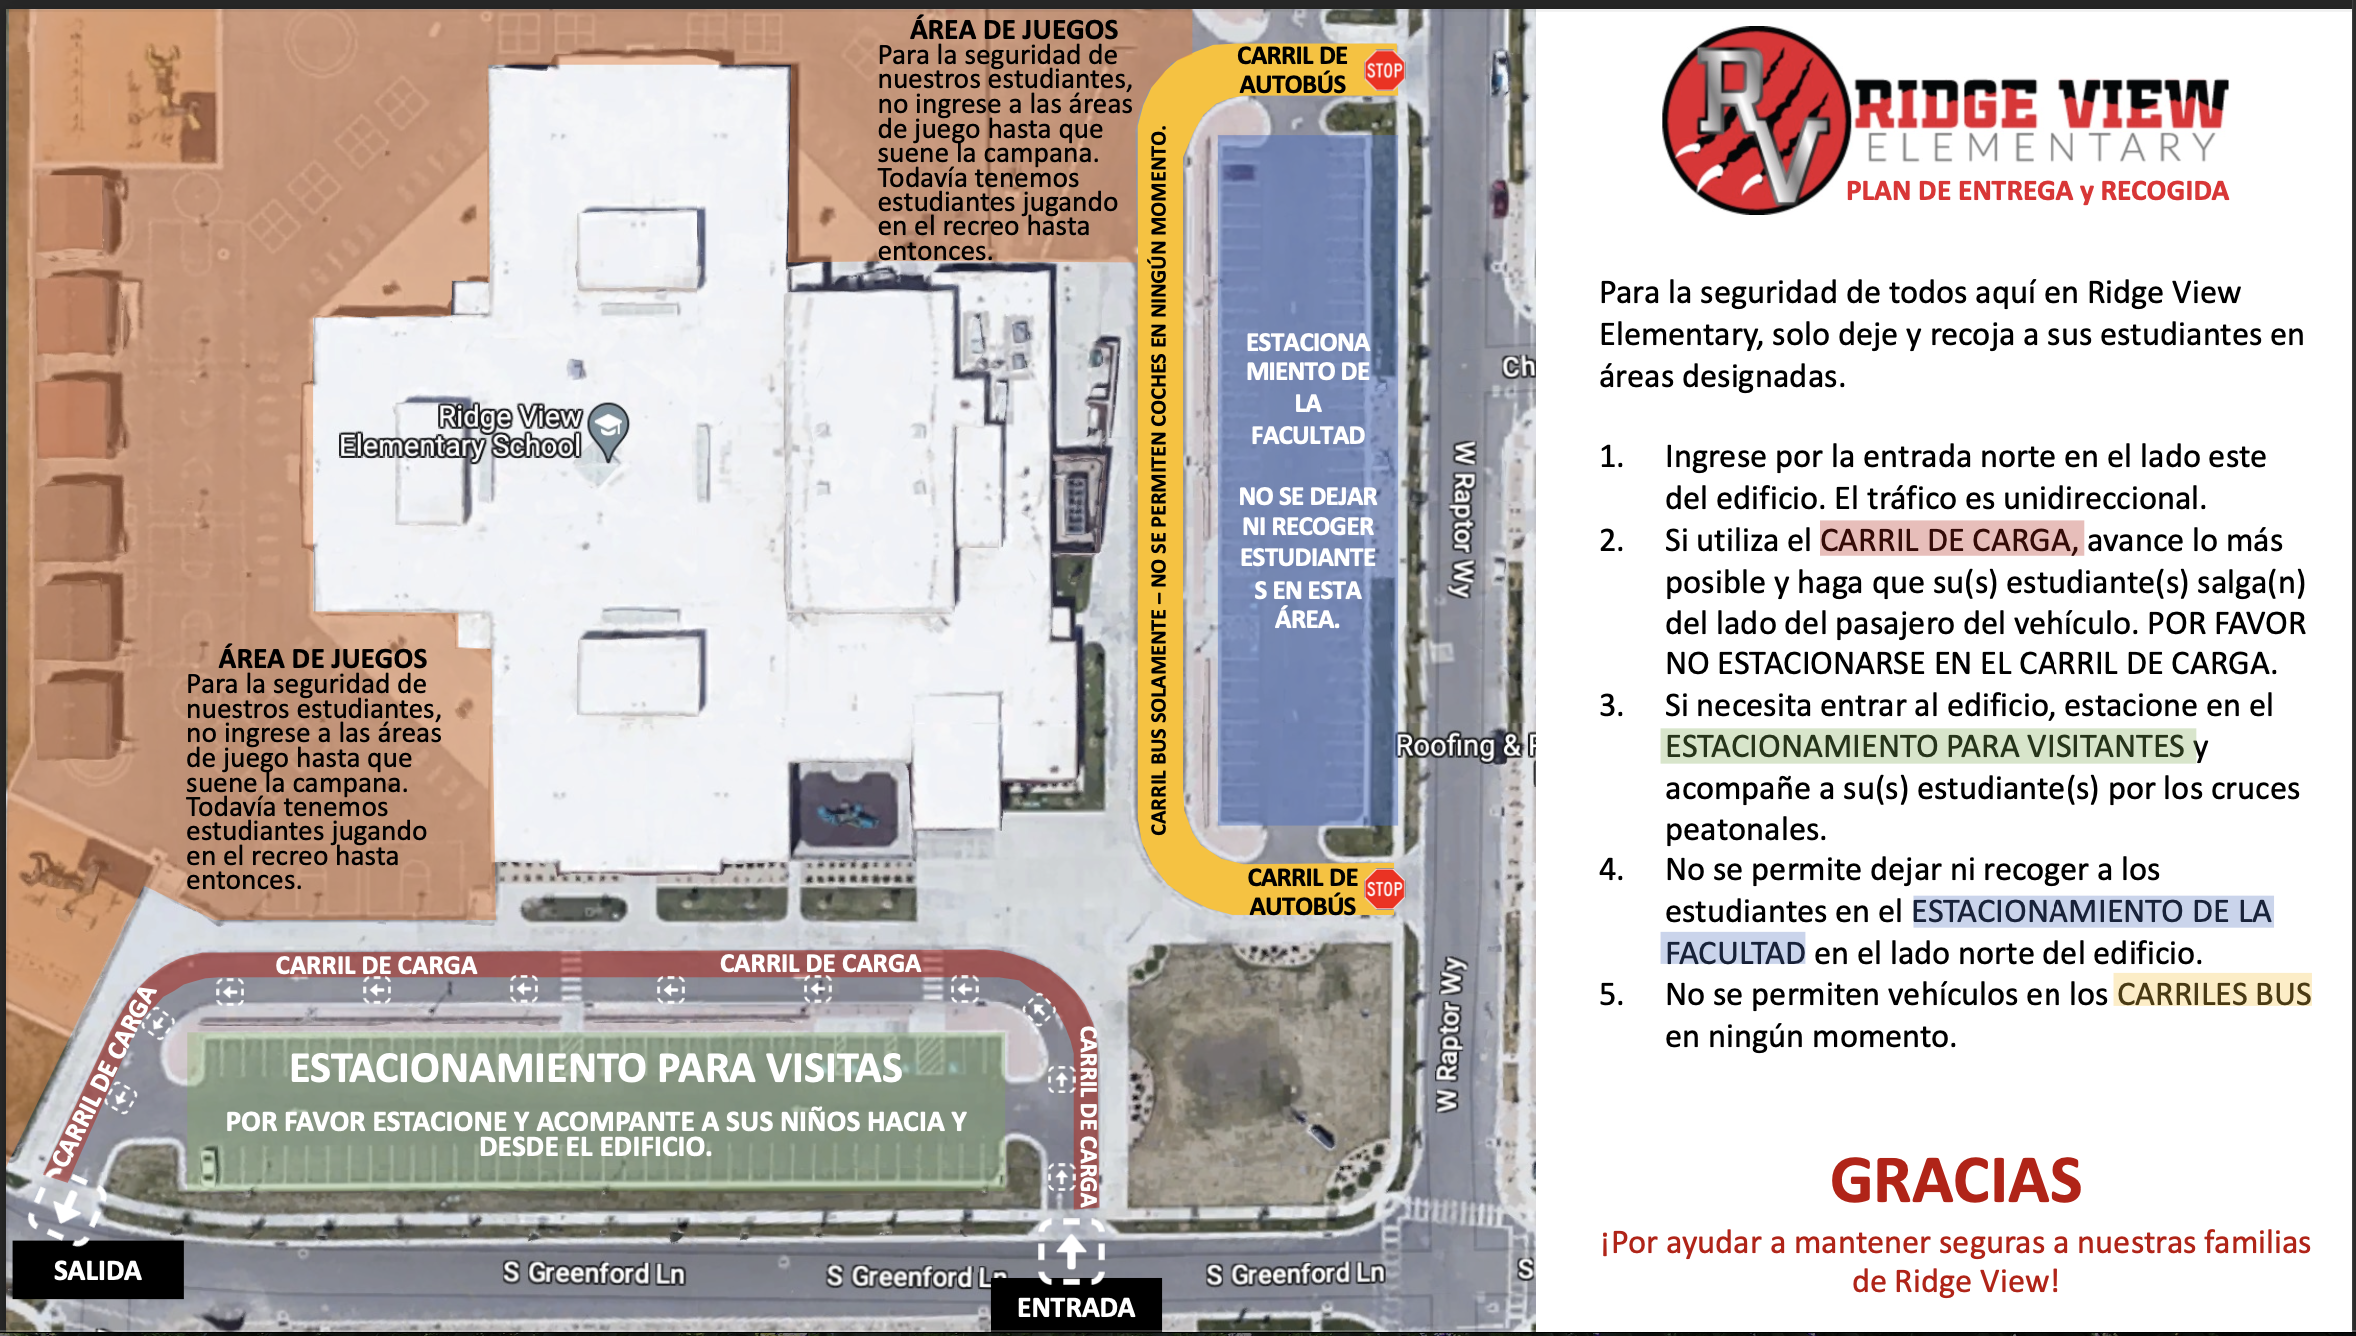 Spanish - Drop off and pick up plan for Ridge View Elementary